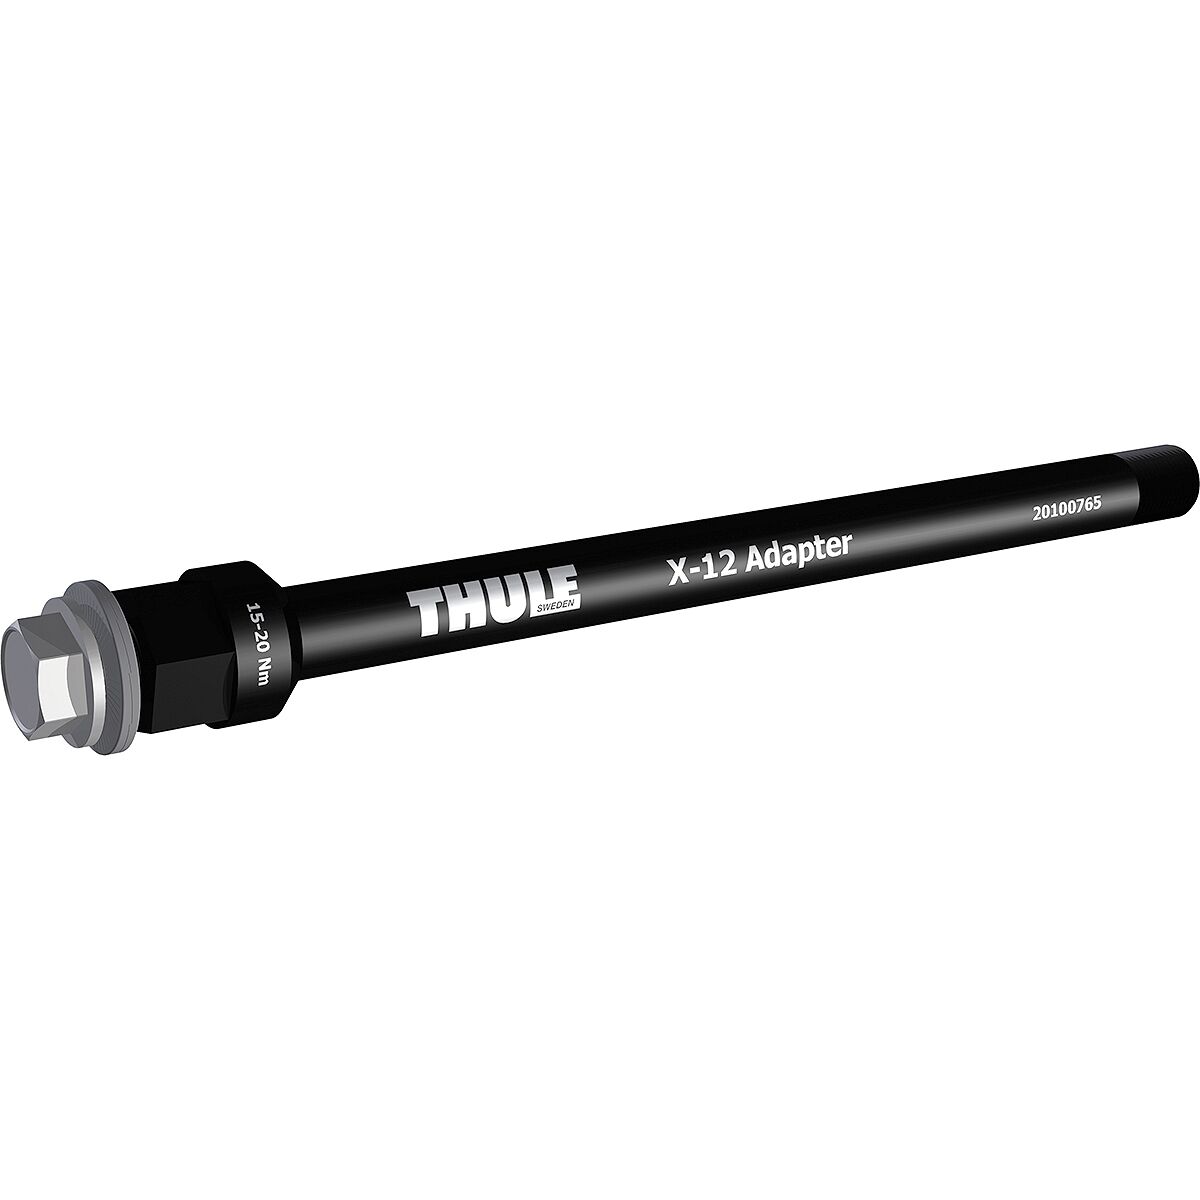 Thule Chariot 12mm Axle Adapter